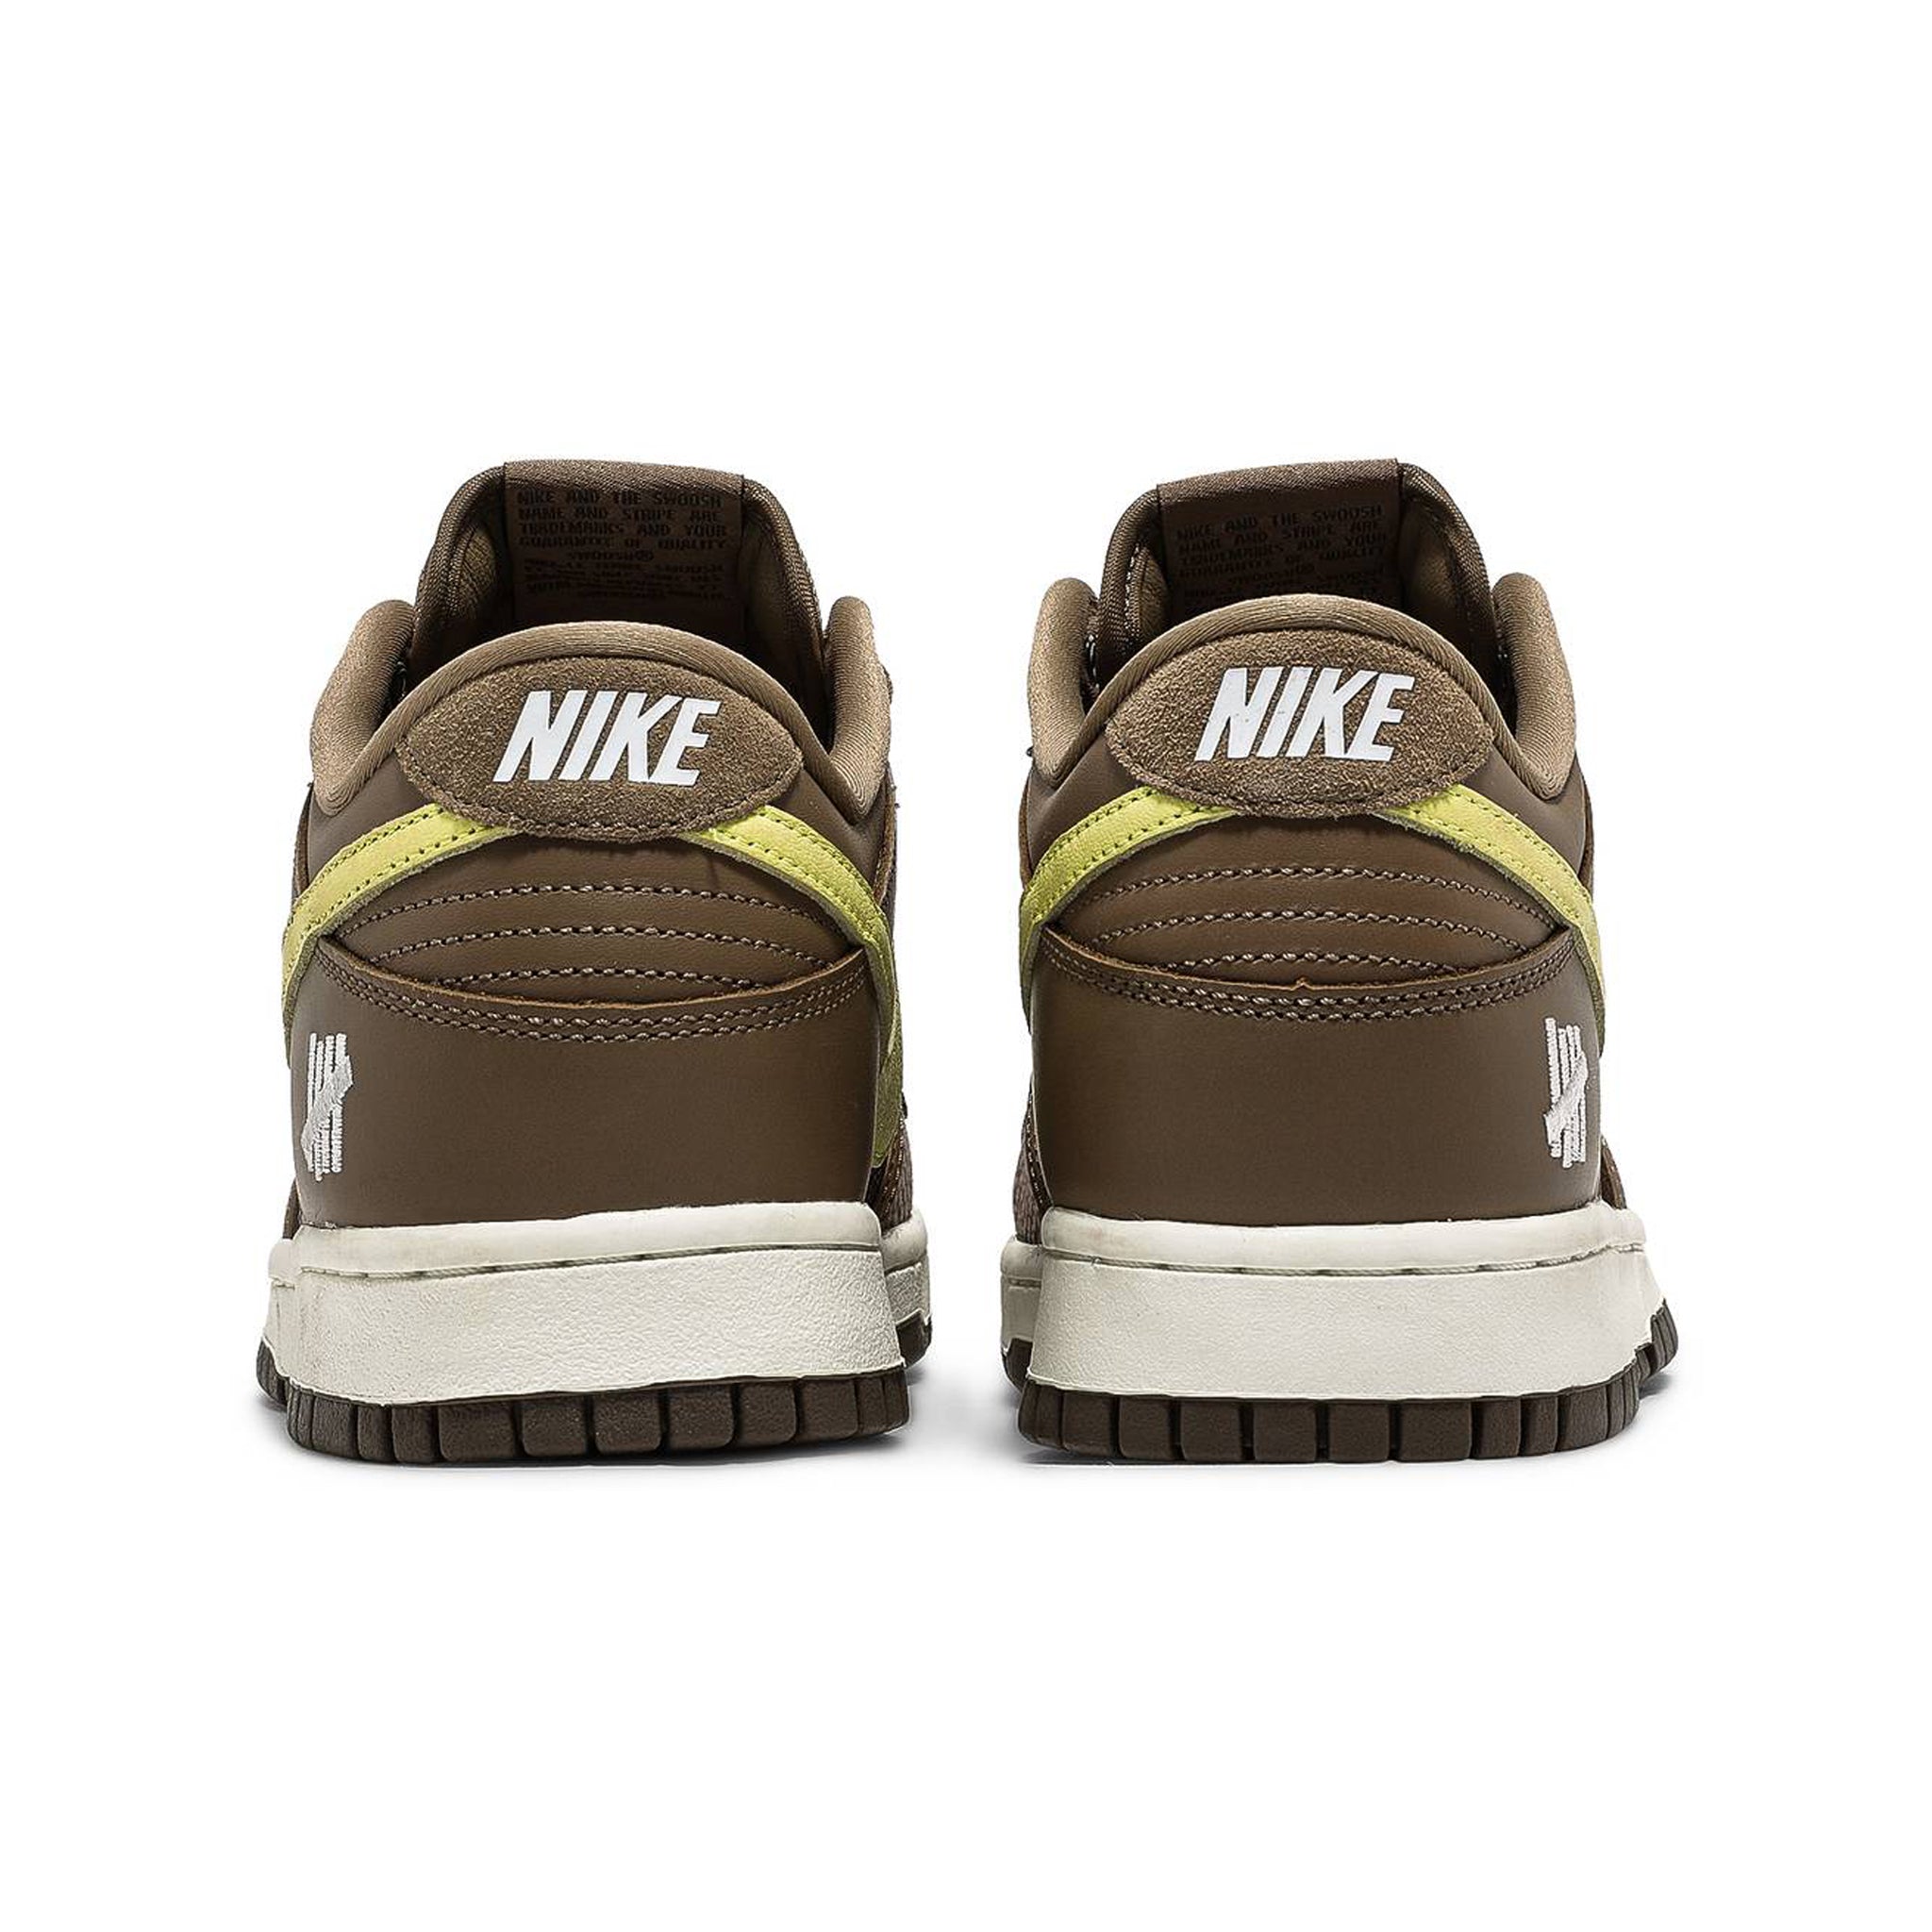 NIKE DUNK LOW SP UNDEFEATED CANTEEN DUNK VS. AF1 PACK